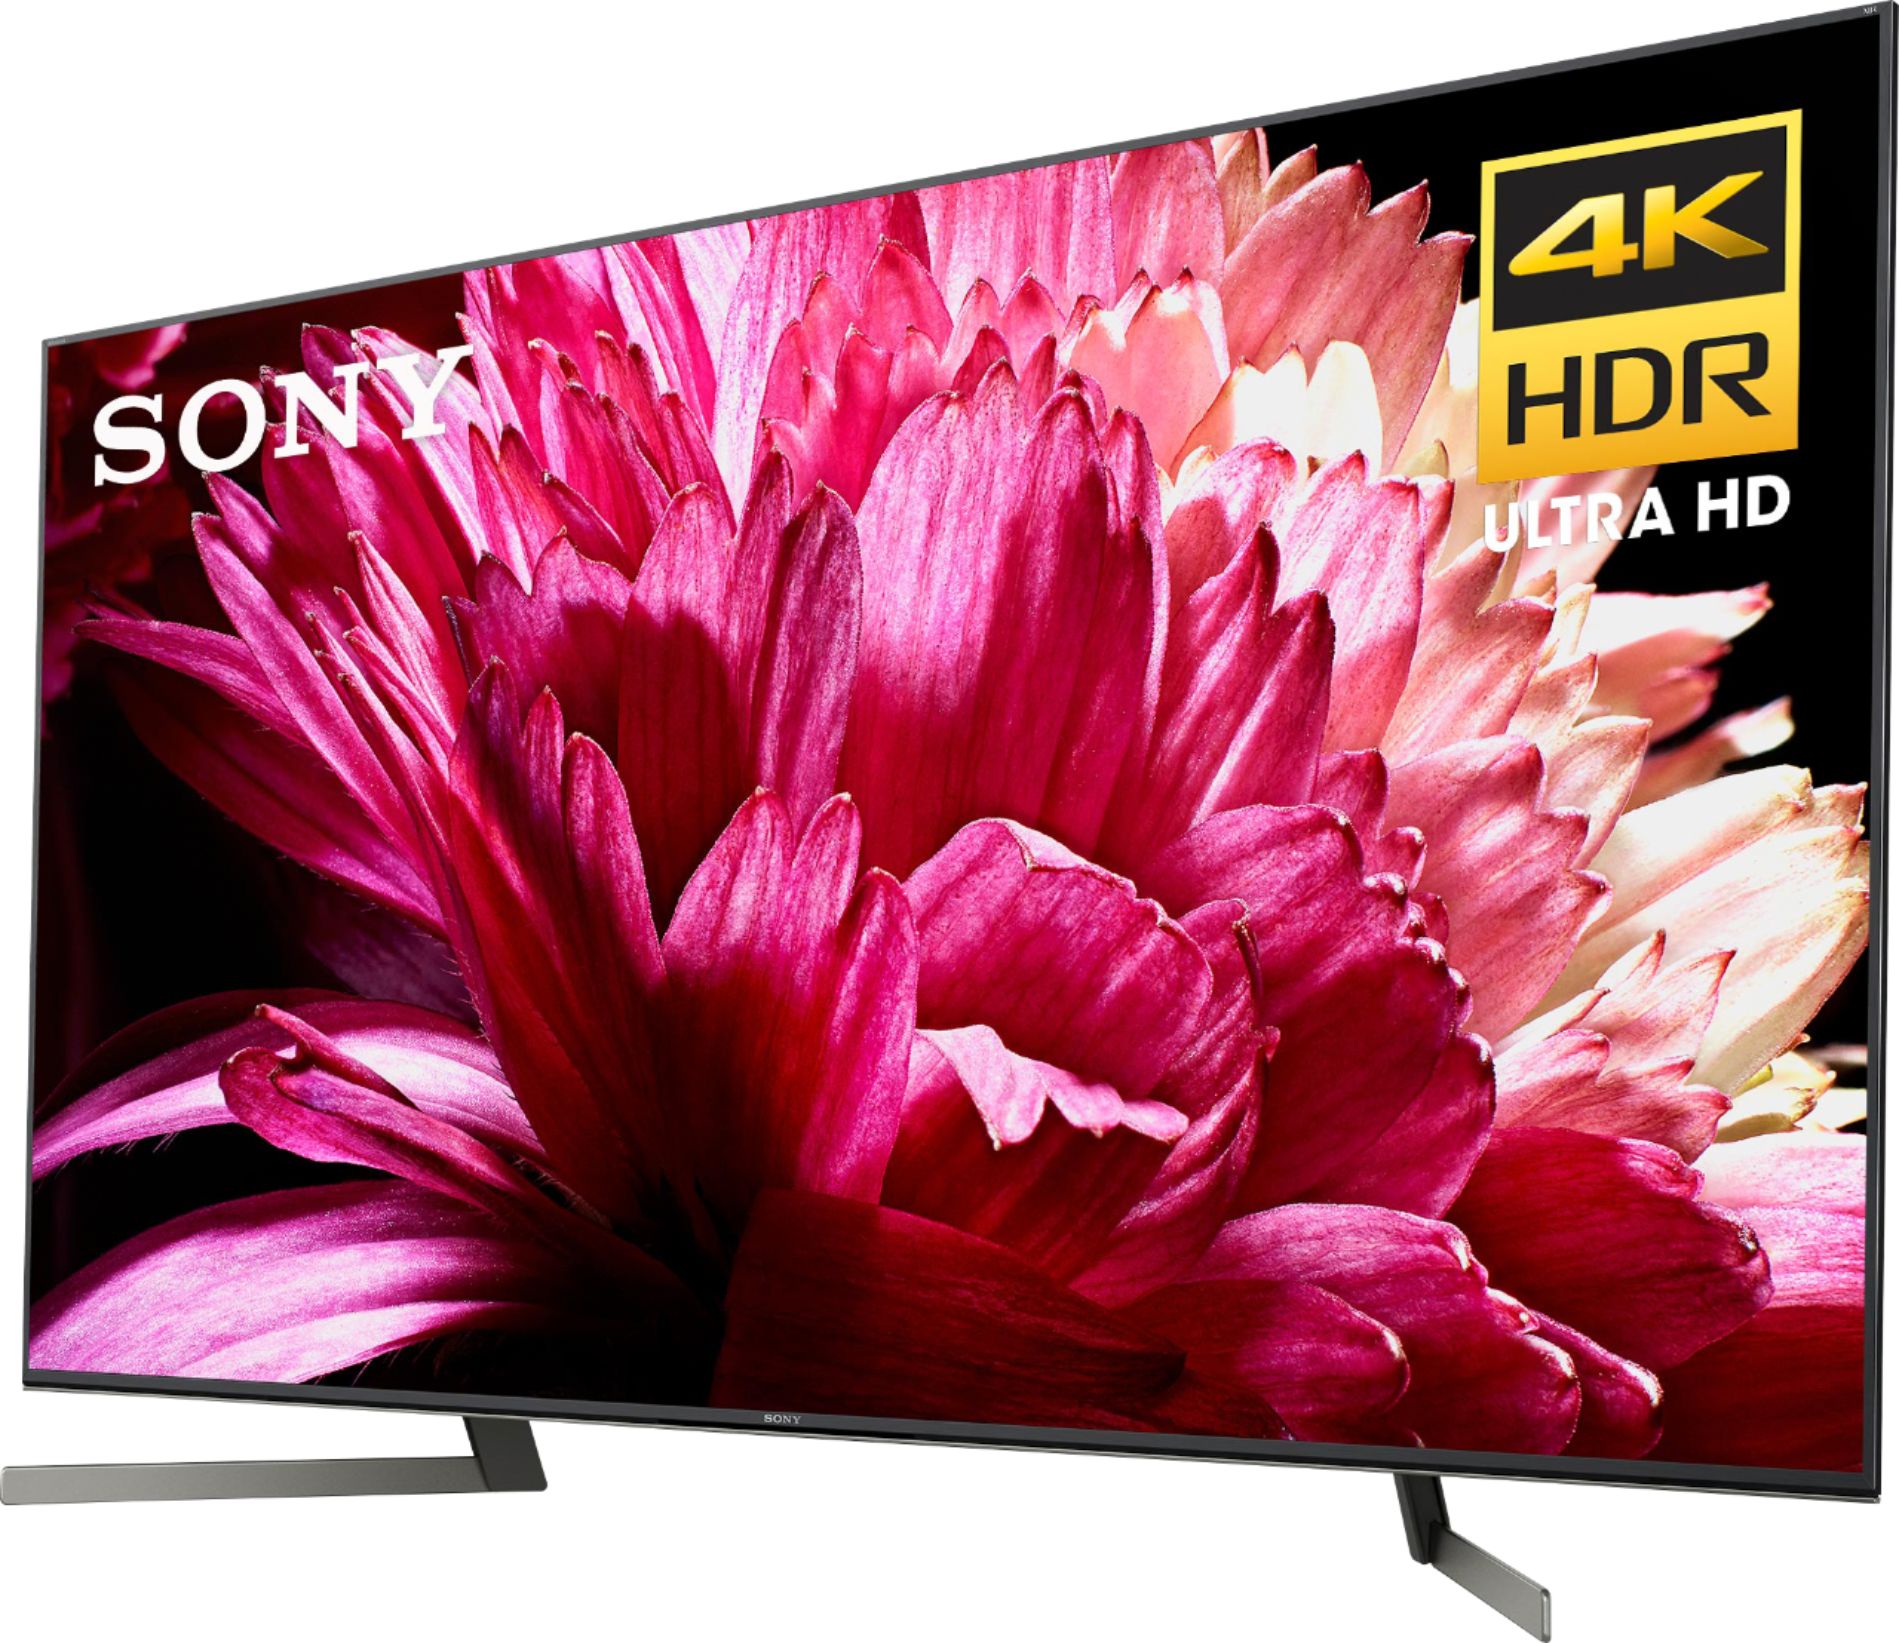 2019 Model Sony X950G 75 Inch TV 4K Ultra HD Smart LED TV with HDR and Alexa Compatibility 